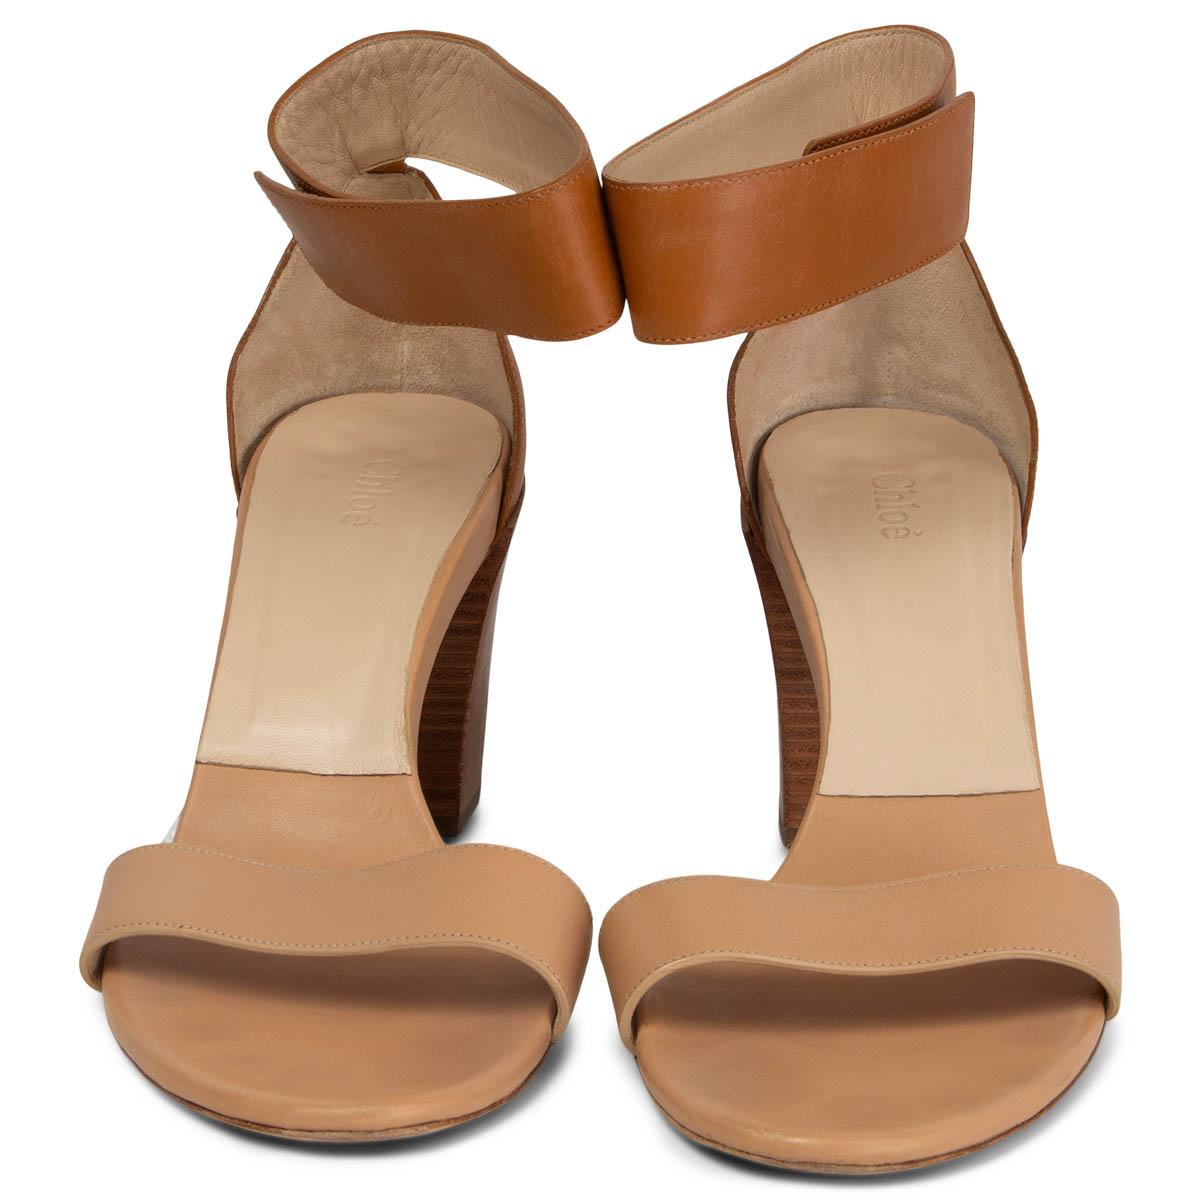 100% authentic Chloé open-toe ankle-strap sandals in camel and nude leather. Opens with a velcro ankle strap. Have been worn and are in excellent condition. 

Measurements
Imprinted Size	42
Shoe Size	42
Inside Sole	27.5cm (10.7in)
Width	8.5cm